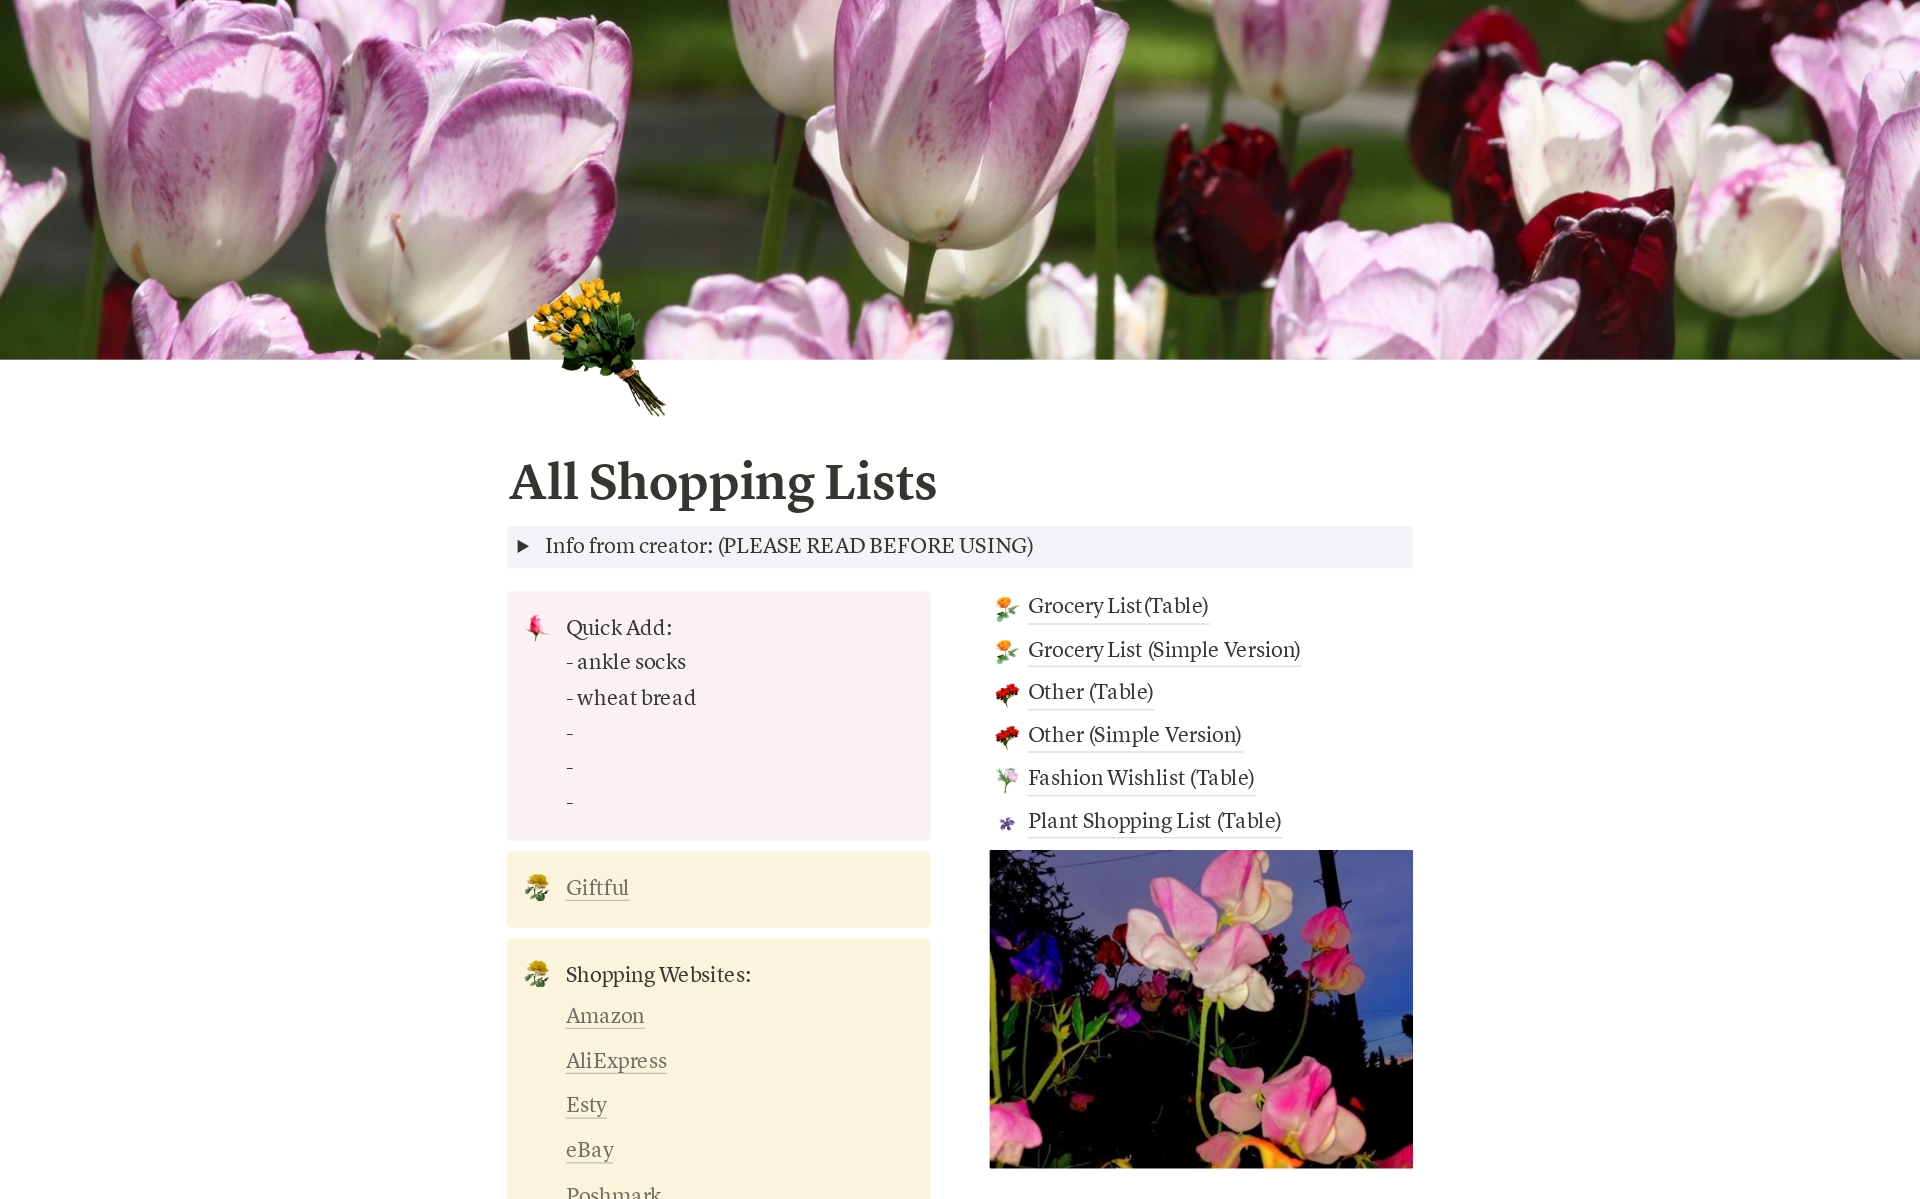 A place for all your shopping lists!